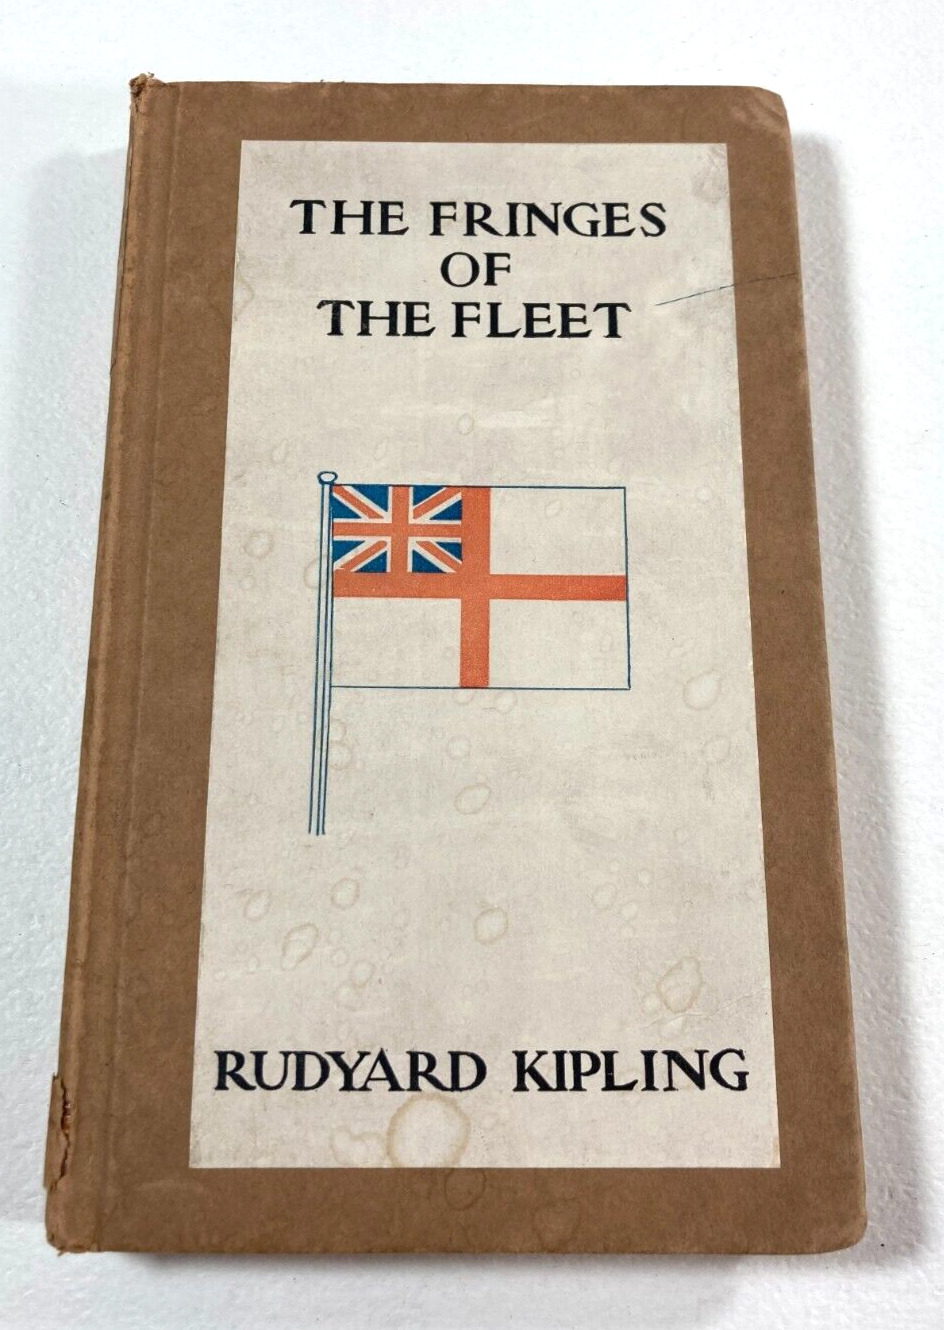 The Fringes of the Fleet by Rudyard Kipling Hardcover 1st American Edition Book